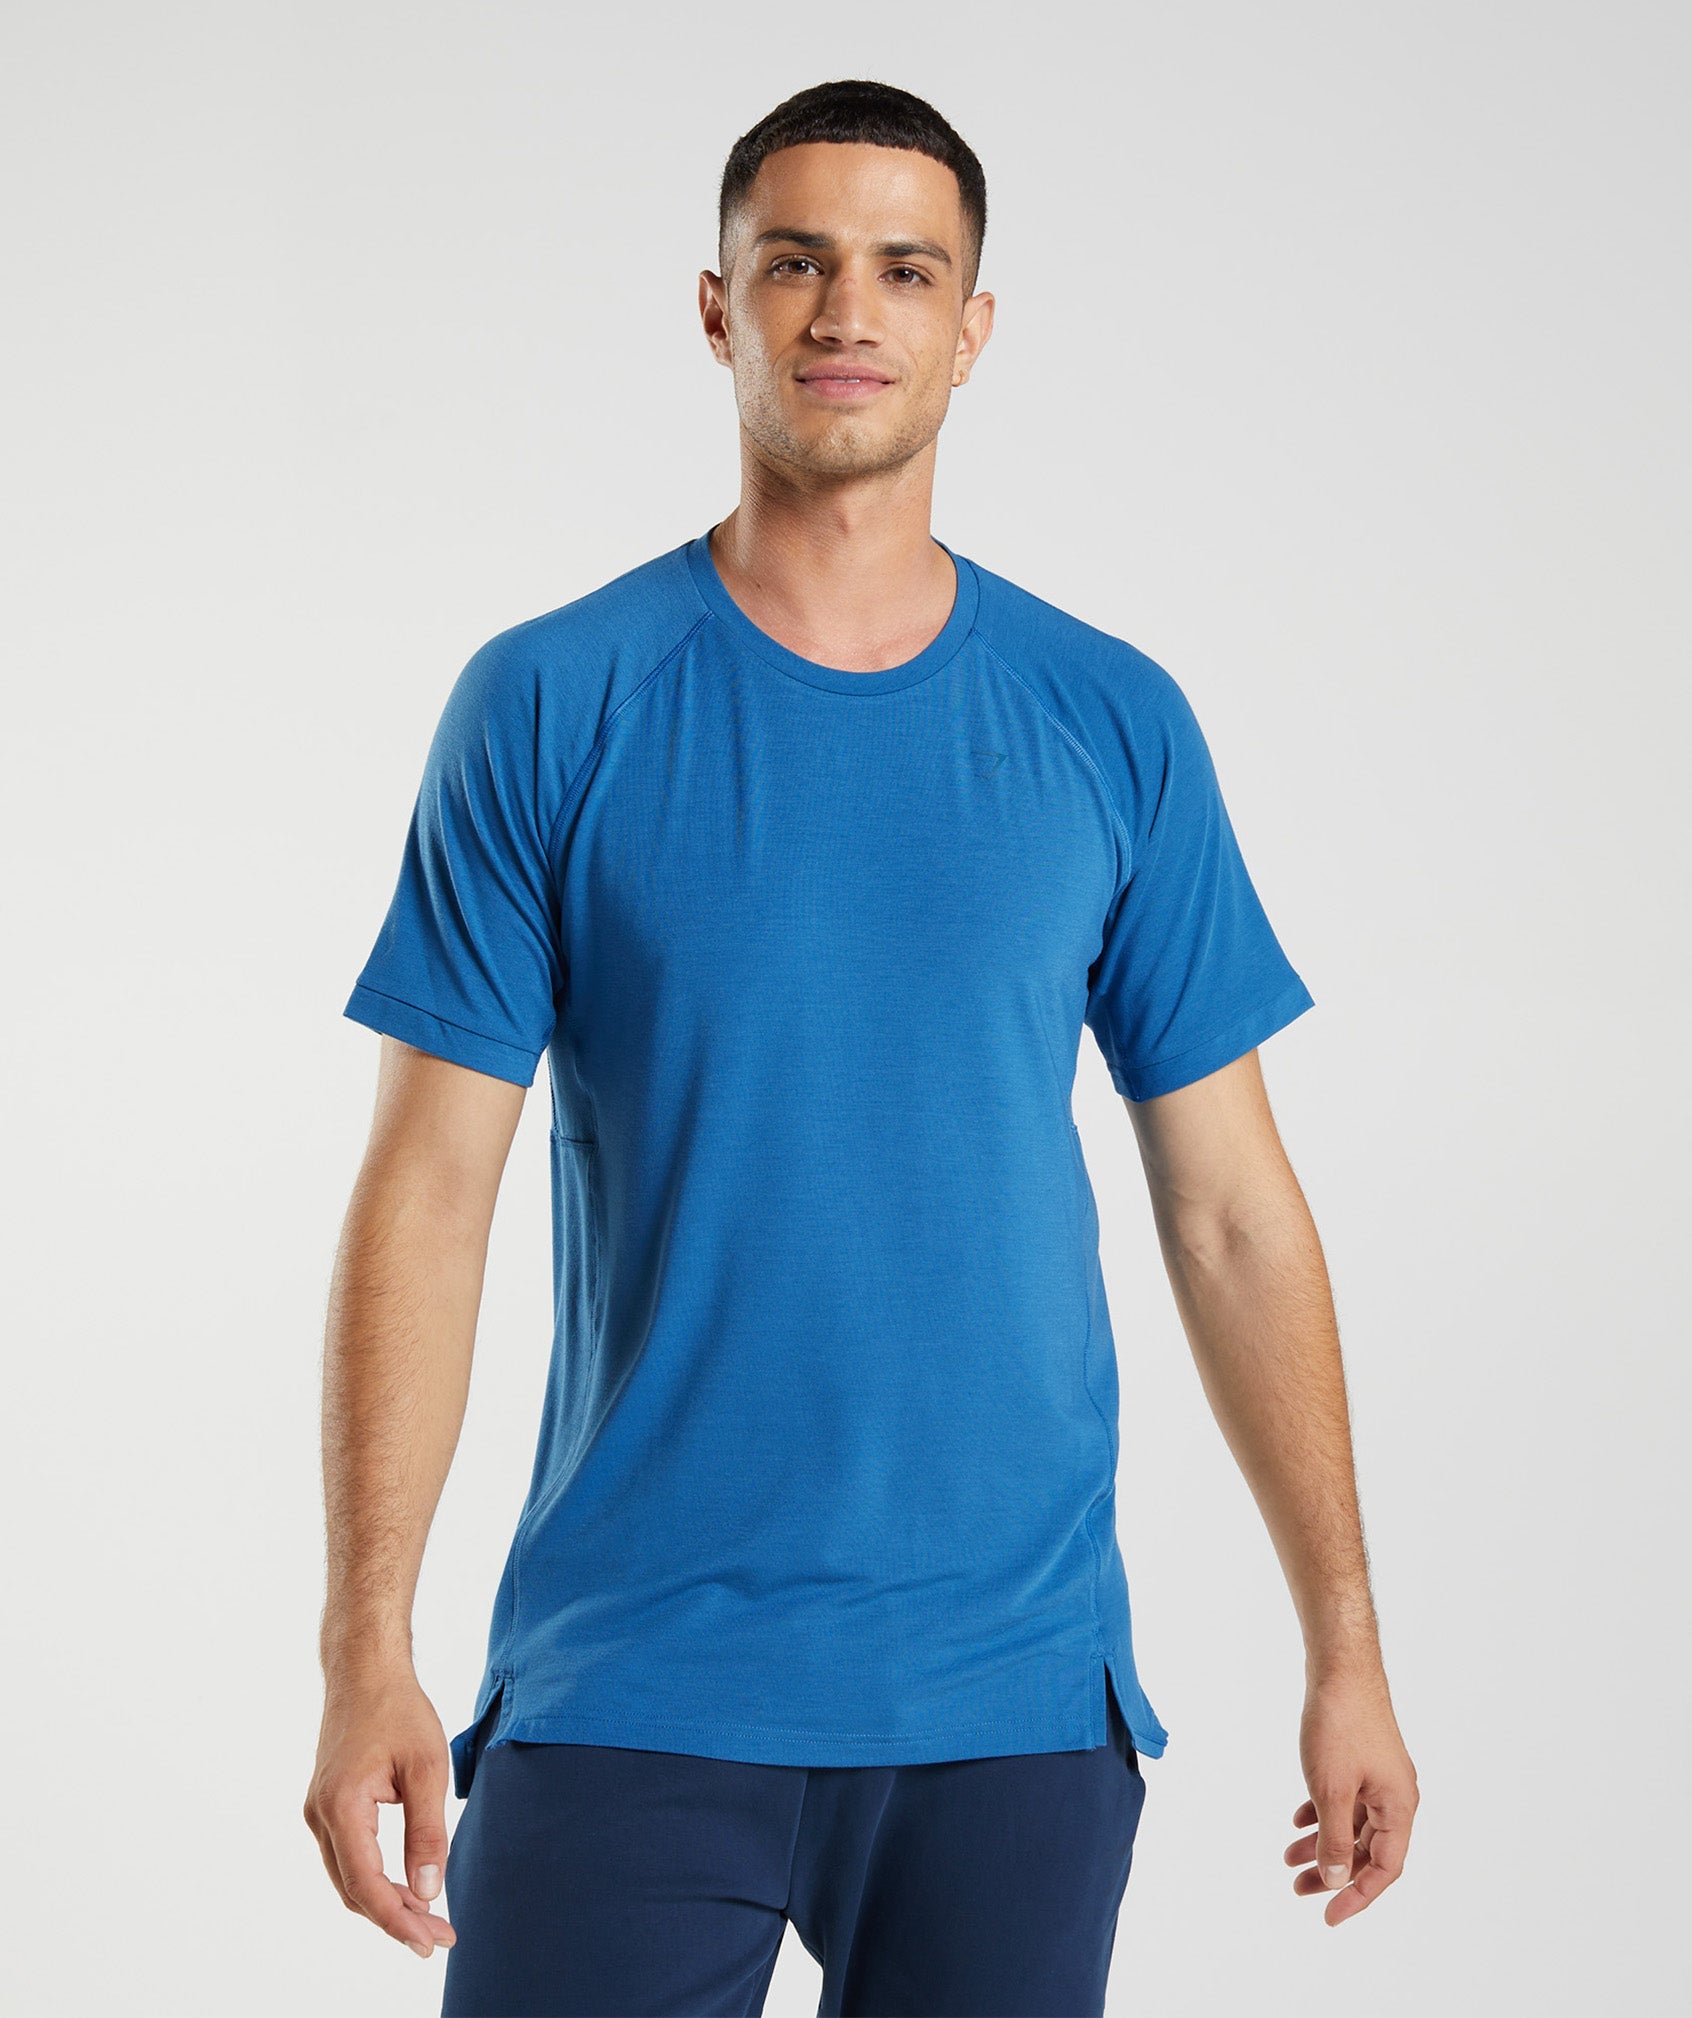 Studio T-Shirt in Lakeside Blue - view 1